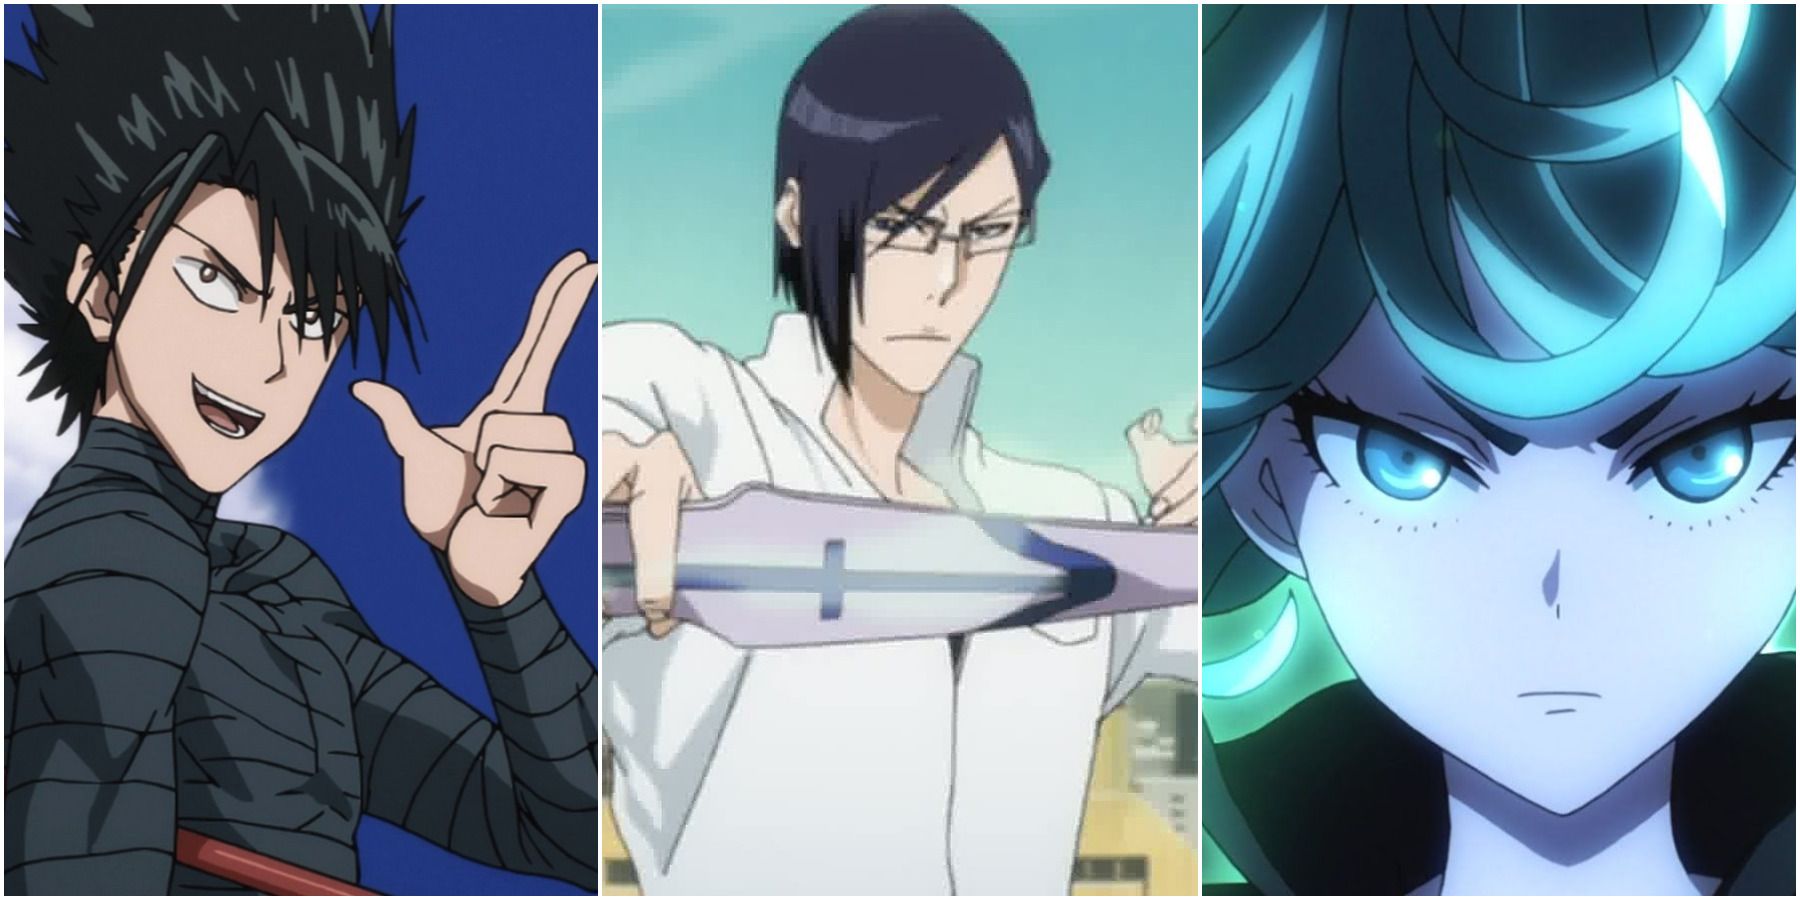 uryu OPM can beat